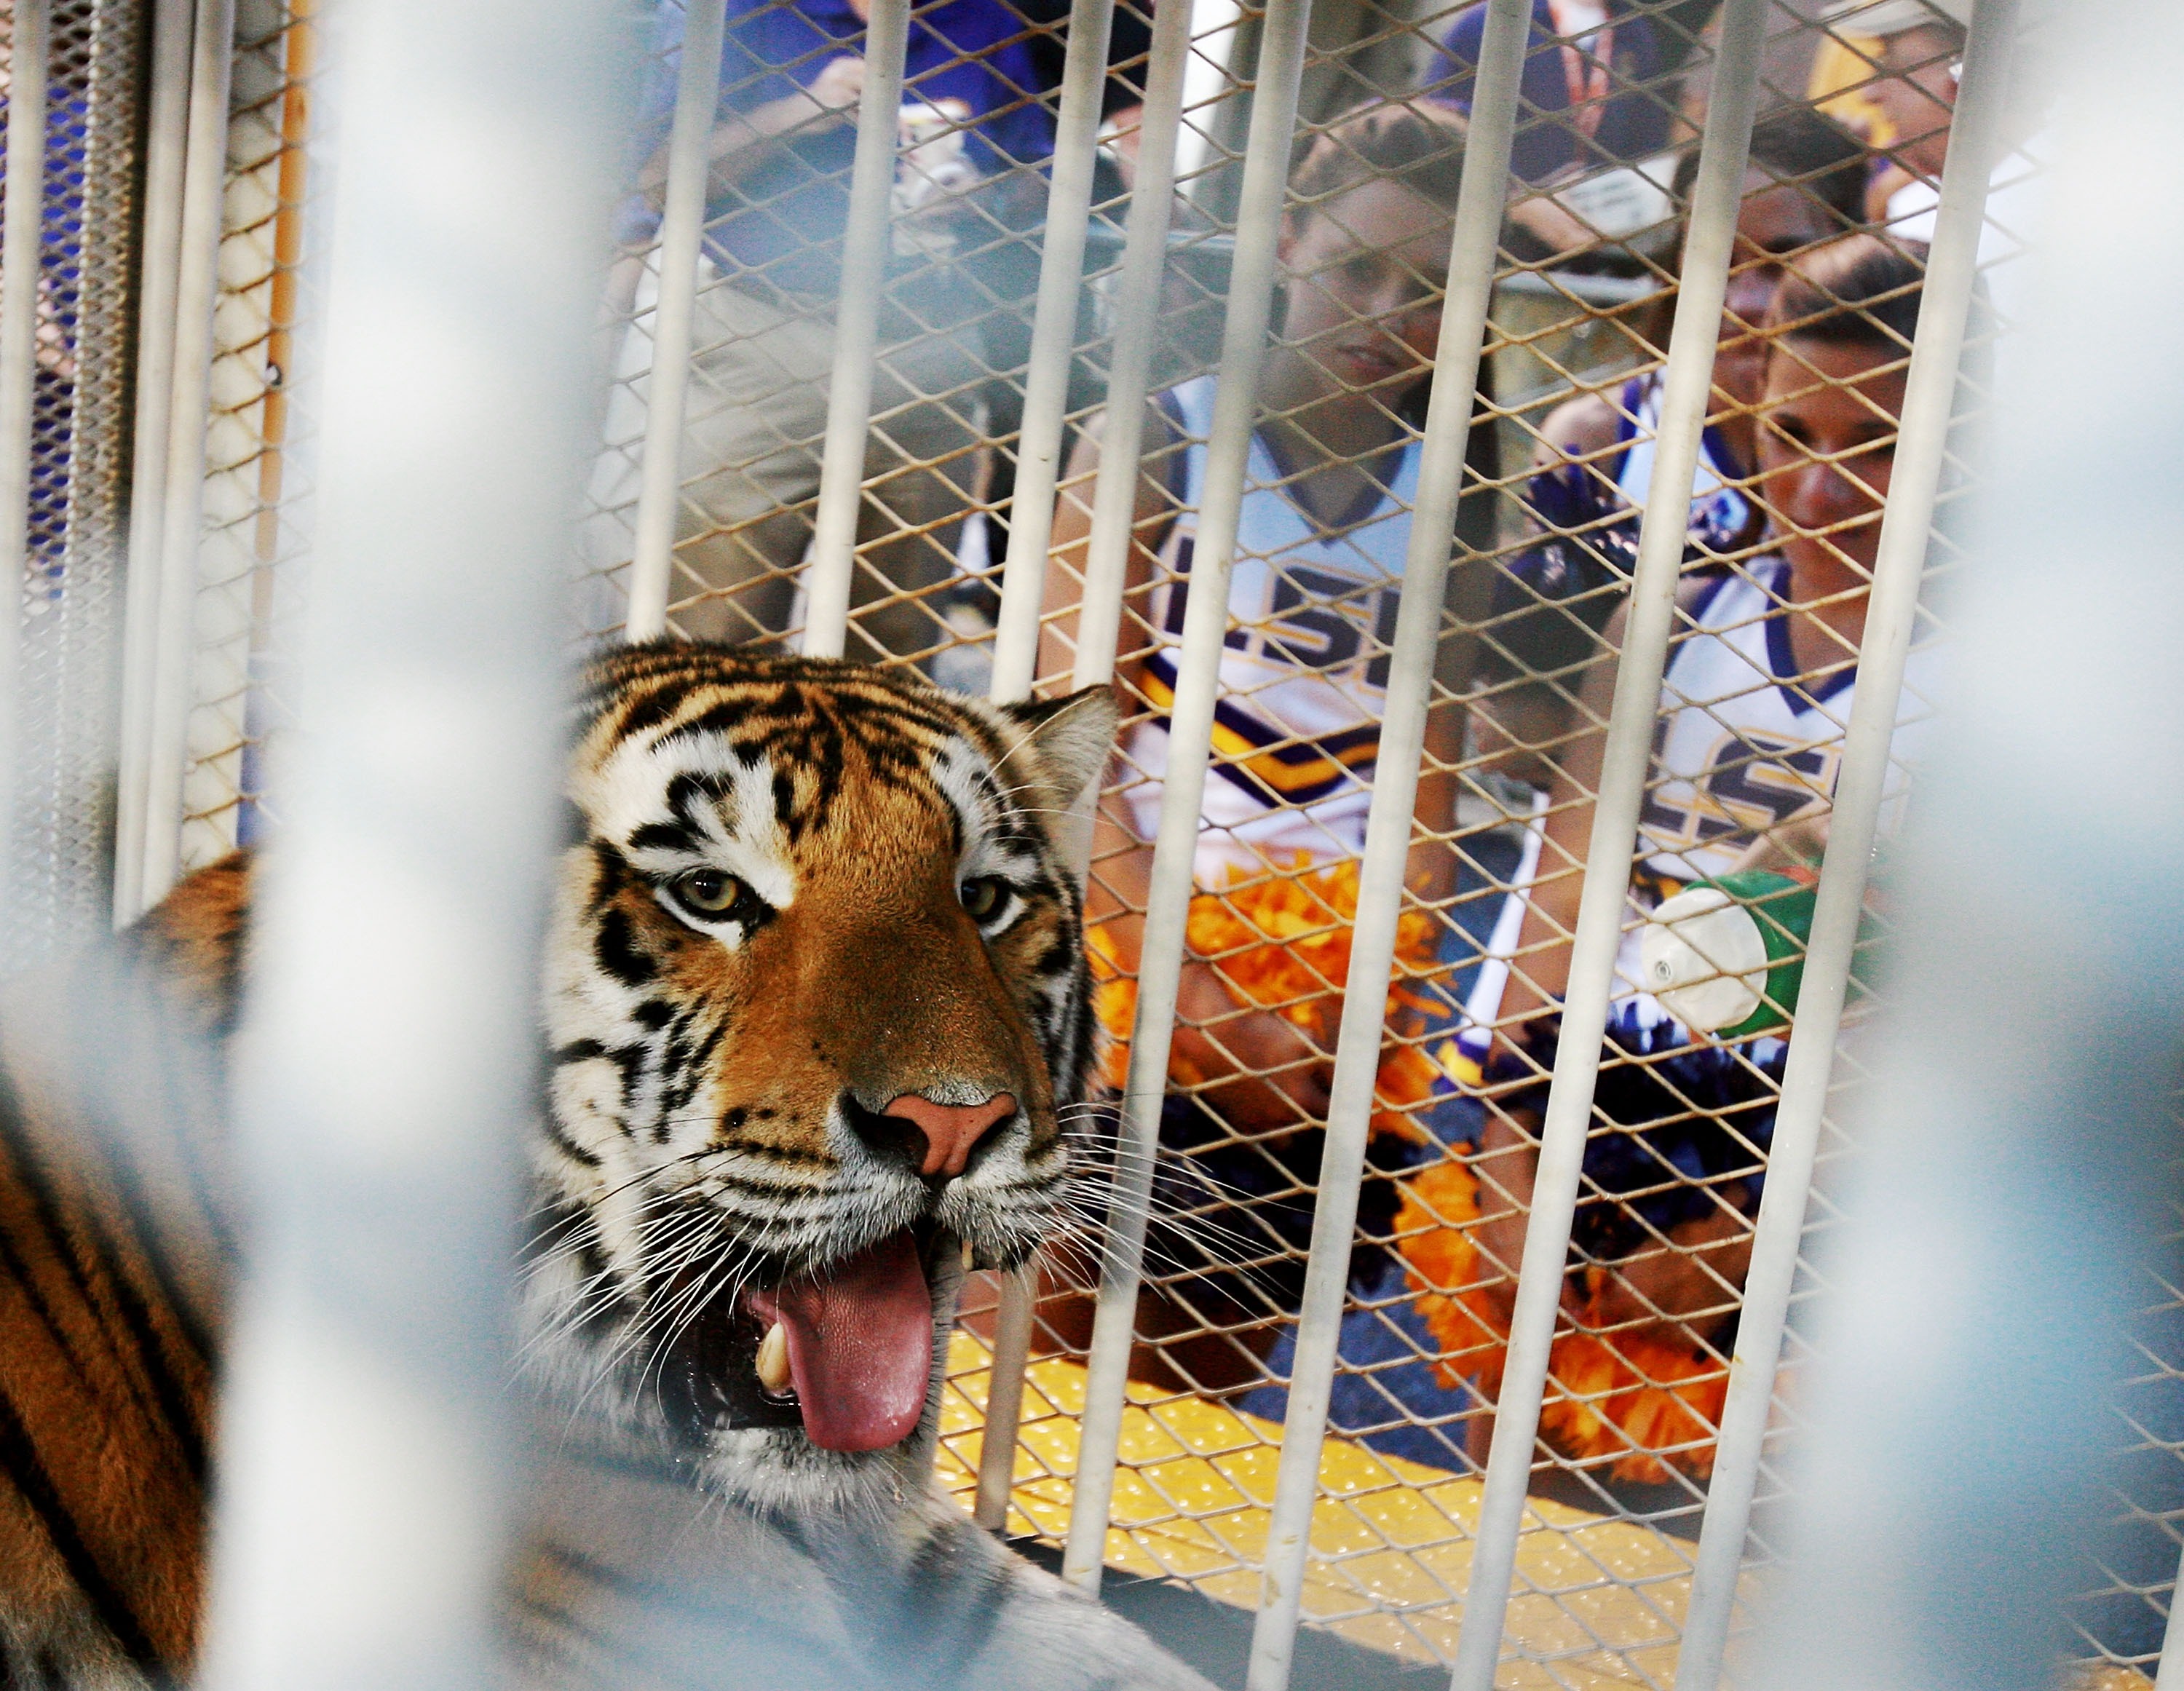 LSU mascot Mike VI, a Bengal/Siberian mixed tiger, is displayed on the field before the Florida Gators take on the LSU Tigers at Tiger Stadium in Baton Rouge, La. on Oct. 6, 2007.